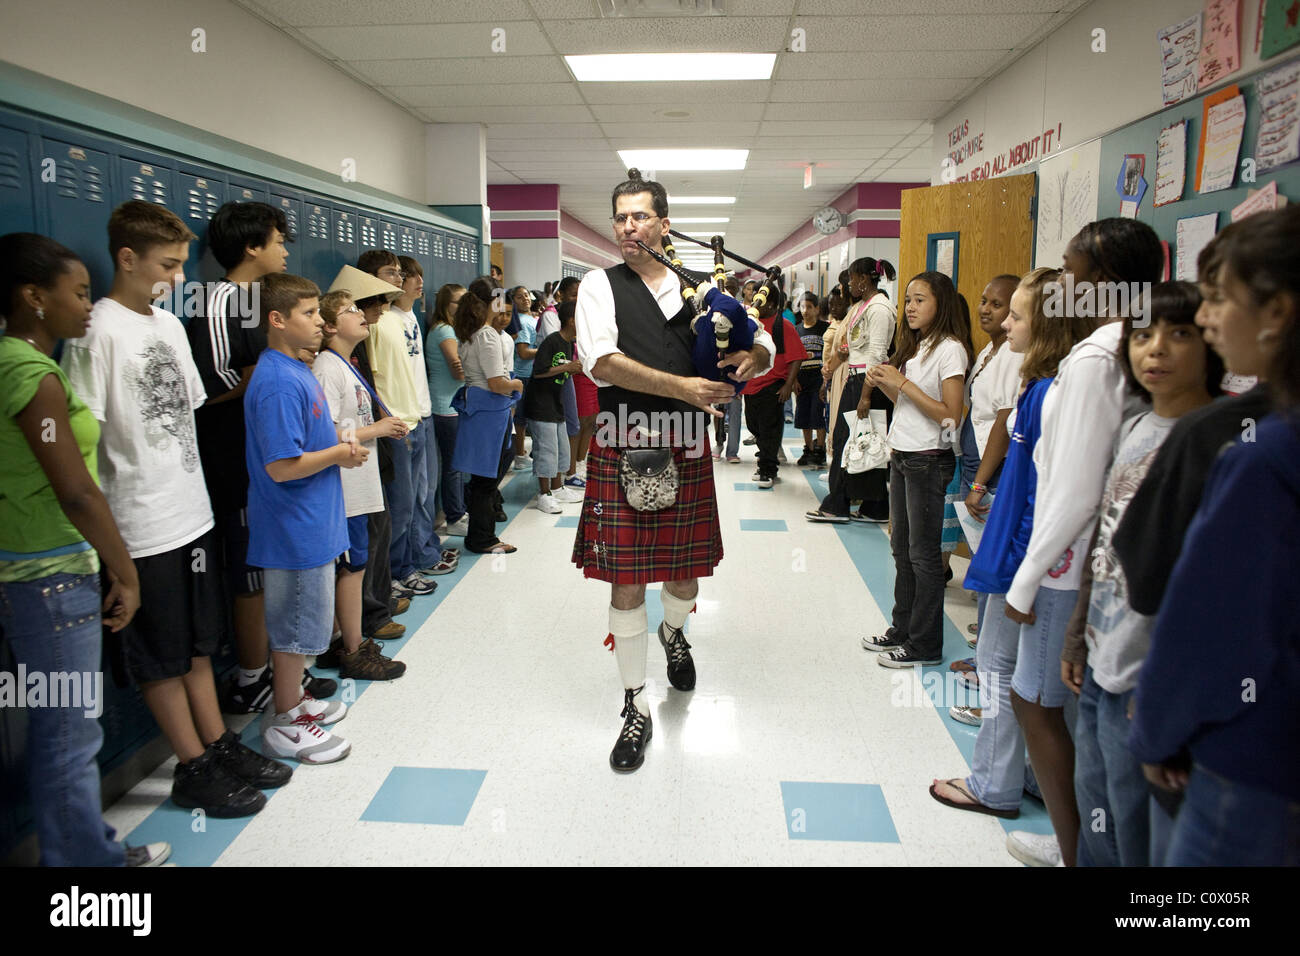 Male bagpipe player in kilt demonstrates the instrument in the hallway at Park Crest Middle School during Diversity Day Stock Photo